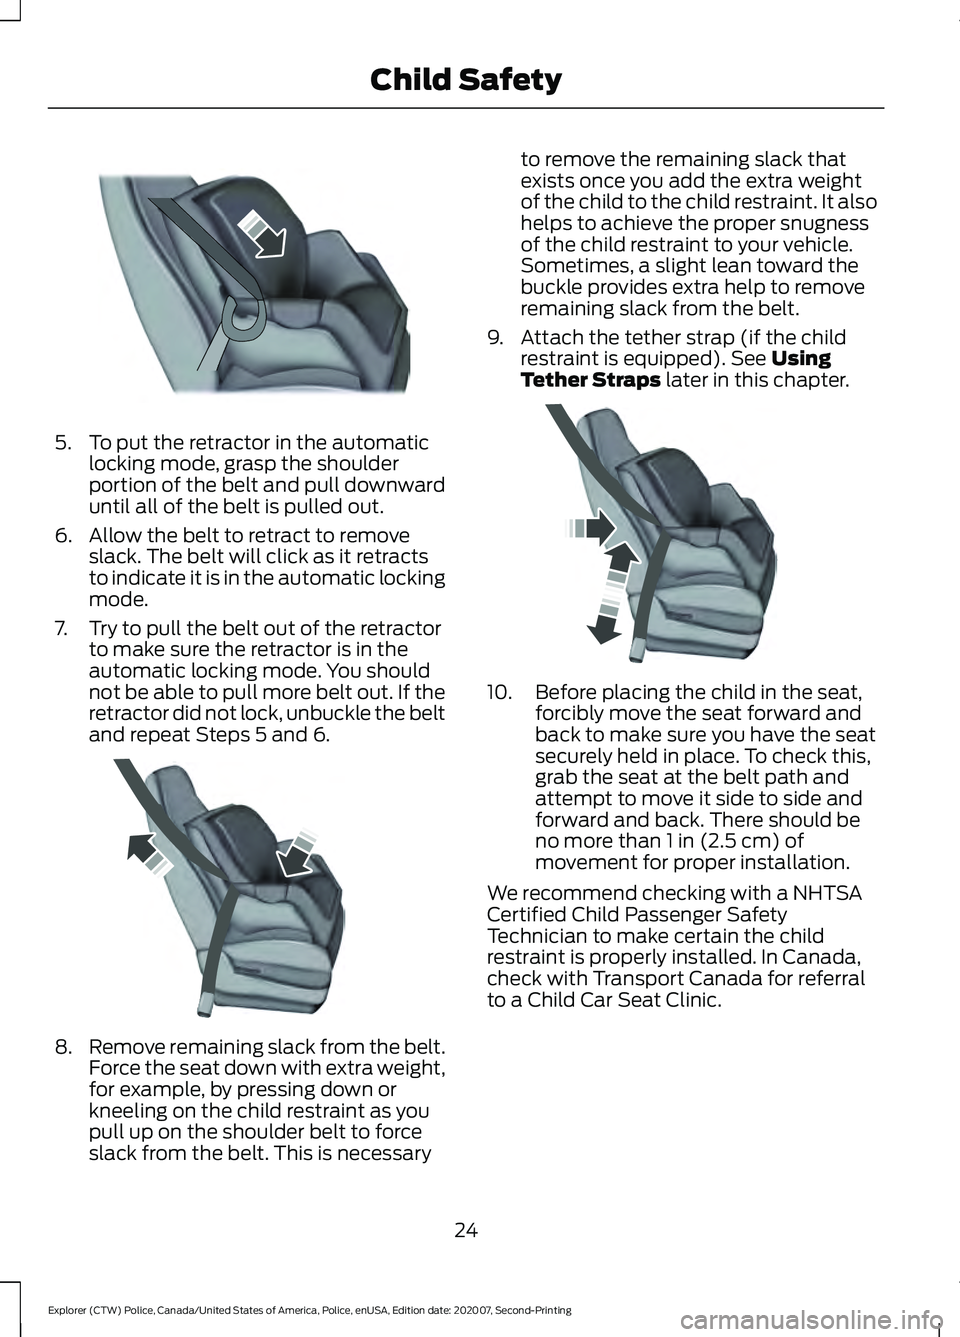 FORD POLICE INTERCEPTOR 2021 Owners Manual 5. To put the retractor in the automatic
locking mode, grasp the shoulder
portion of the belt and pull downward
until all of the belt is pulled out.
6. Allow the belt to retract to remove slack. The b